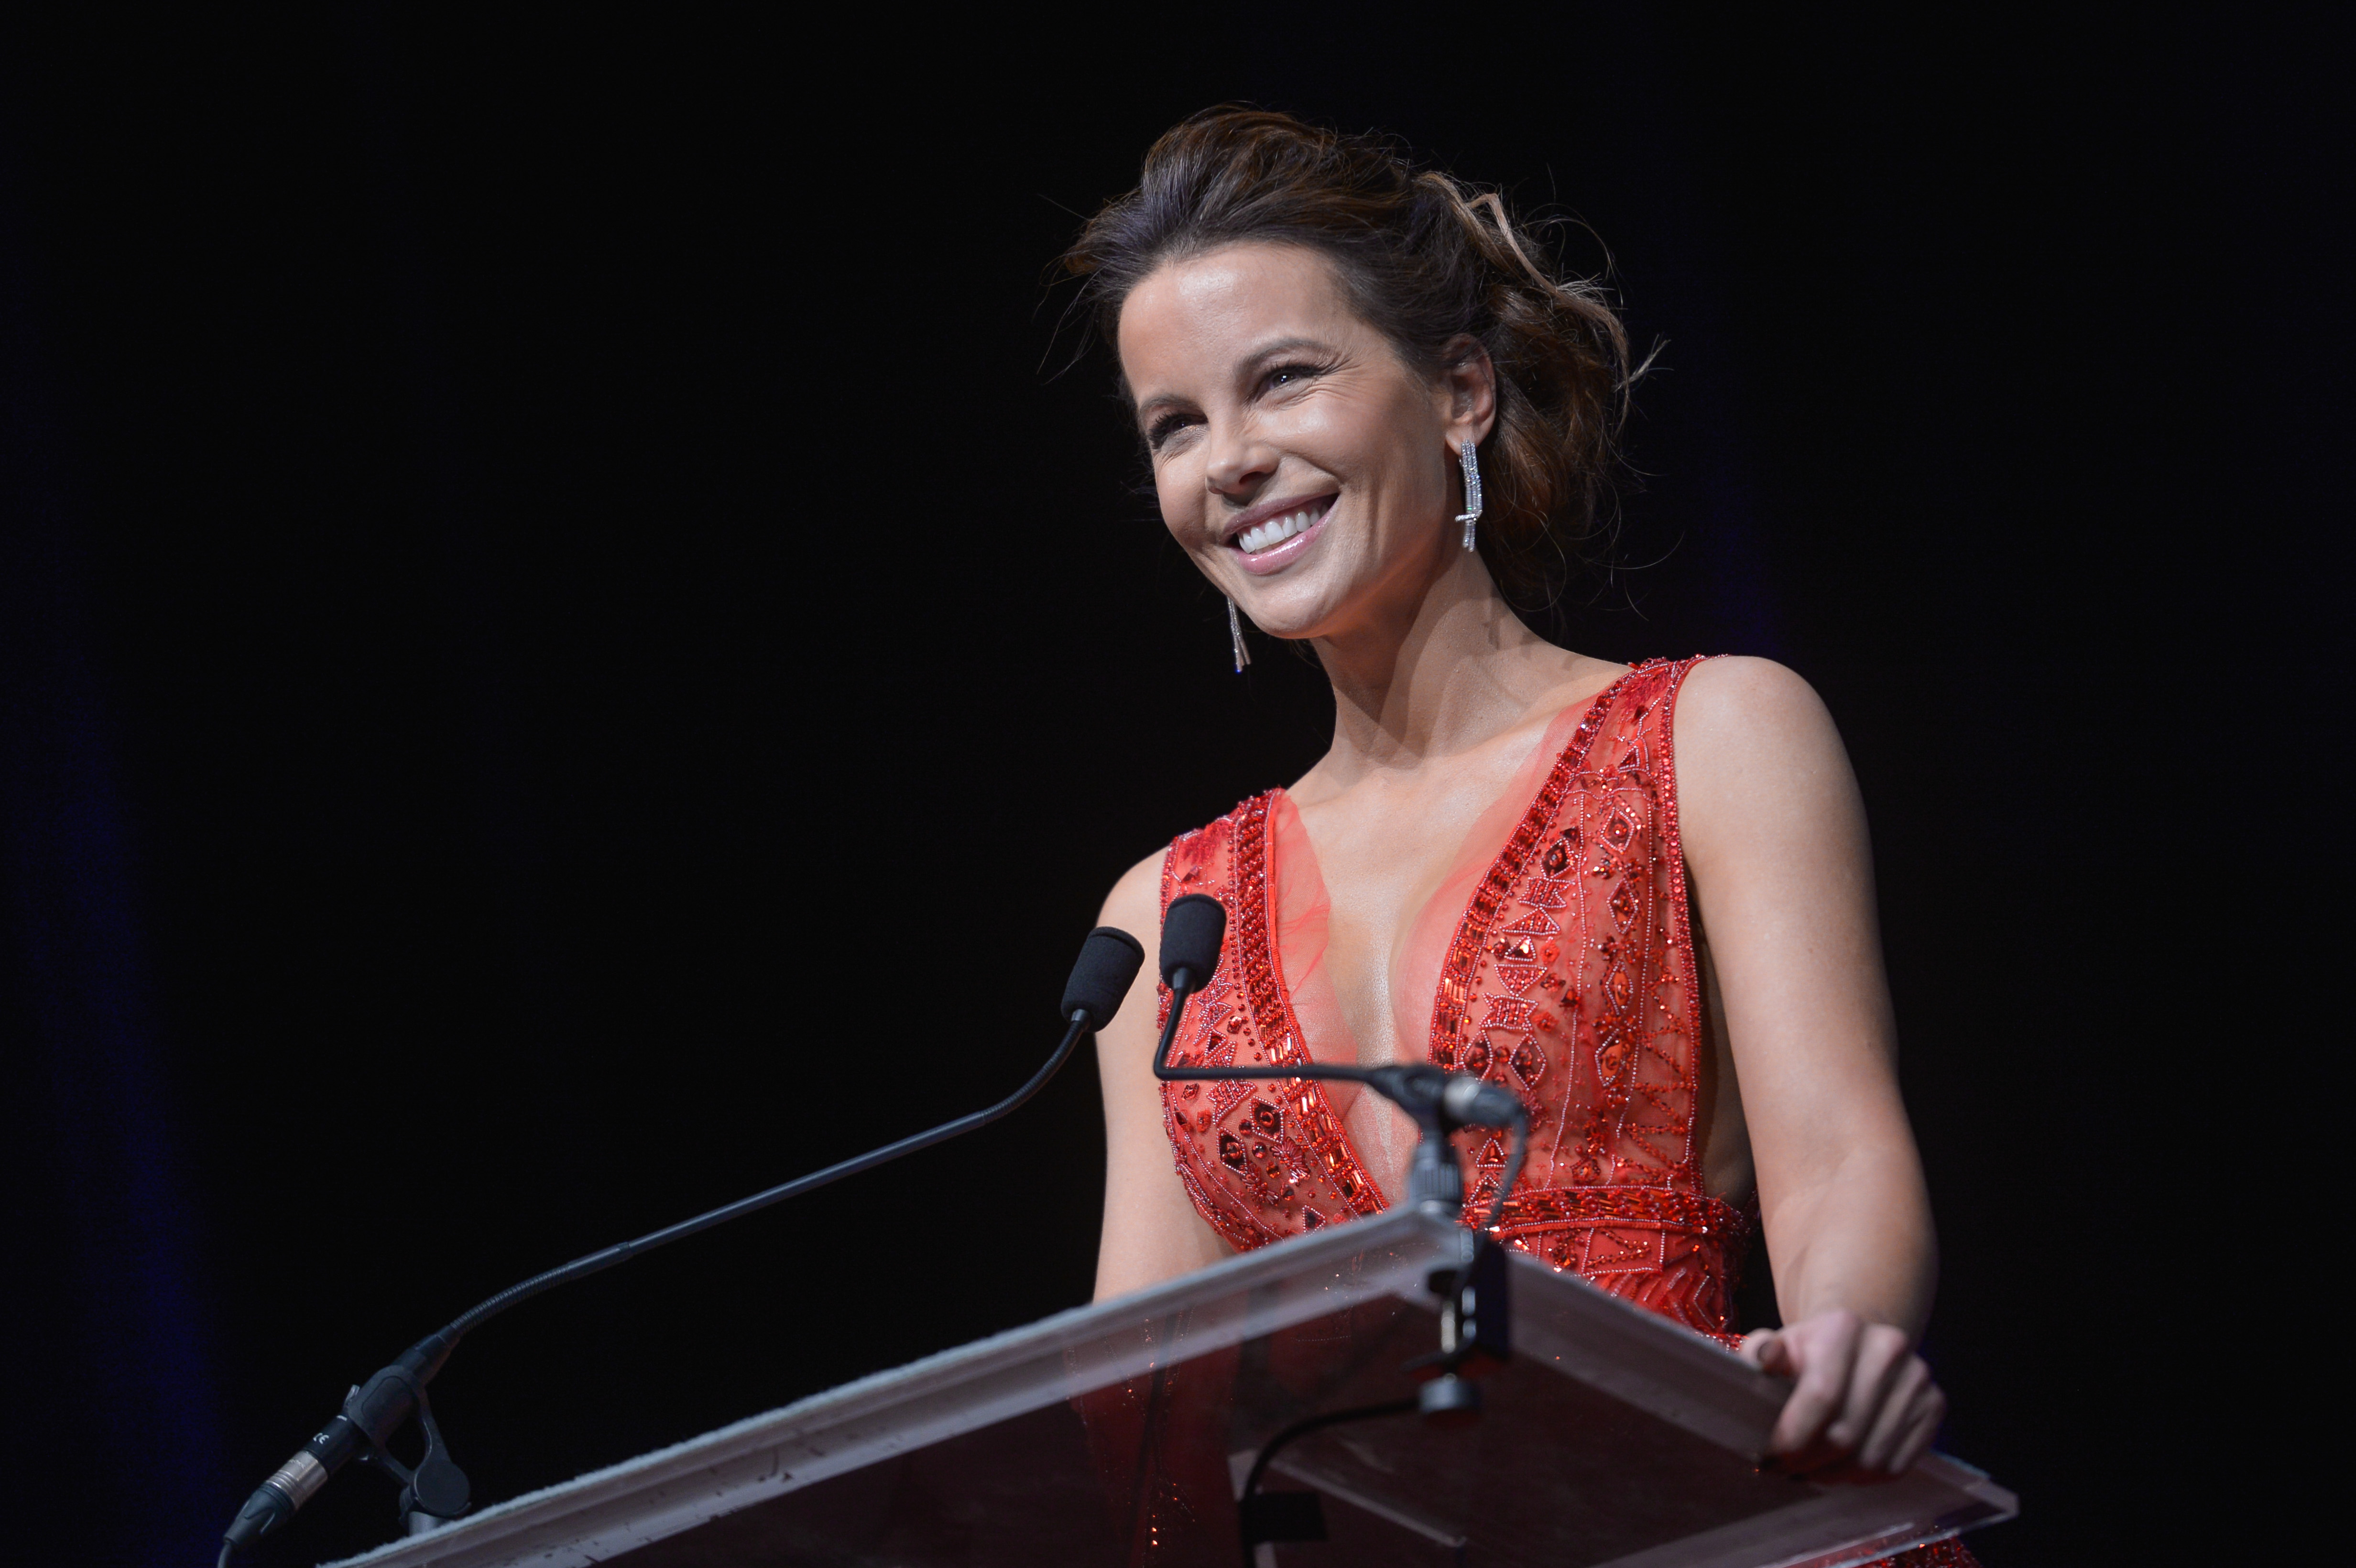 kate-beckinsale-44th-deauville-american-film-festival-in-deauville-france-9218-6